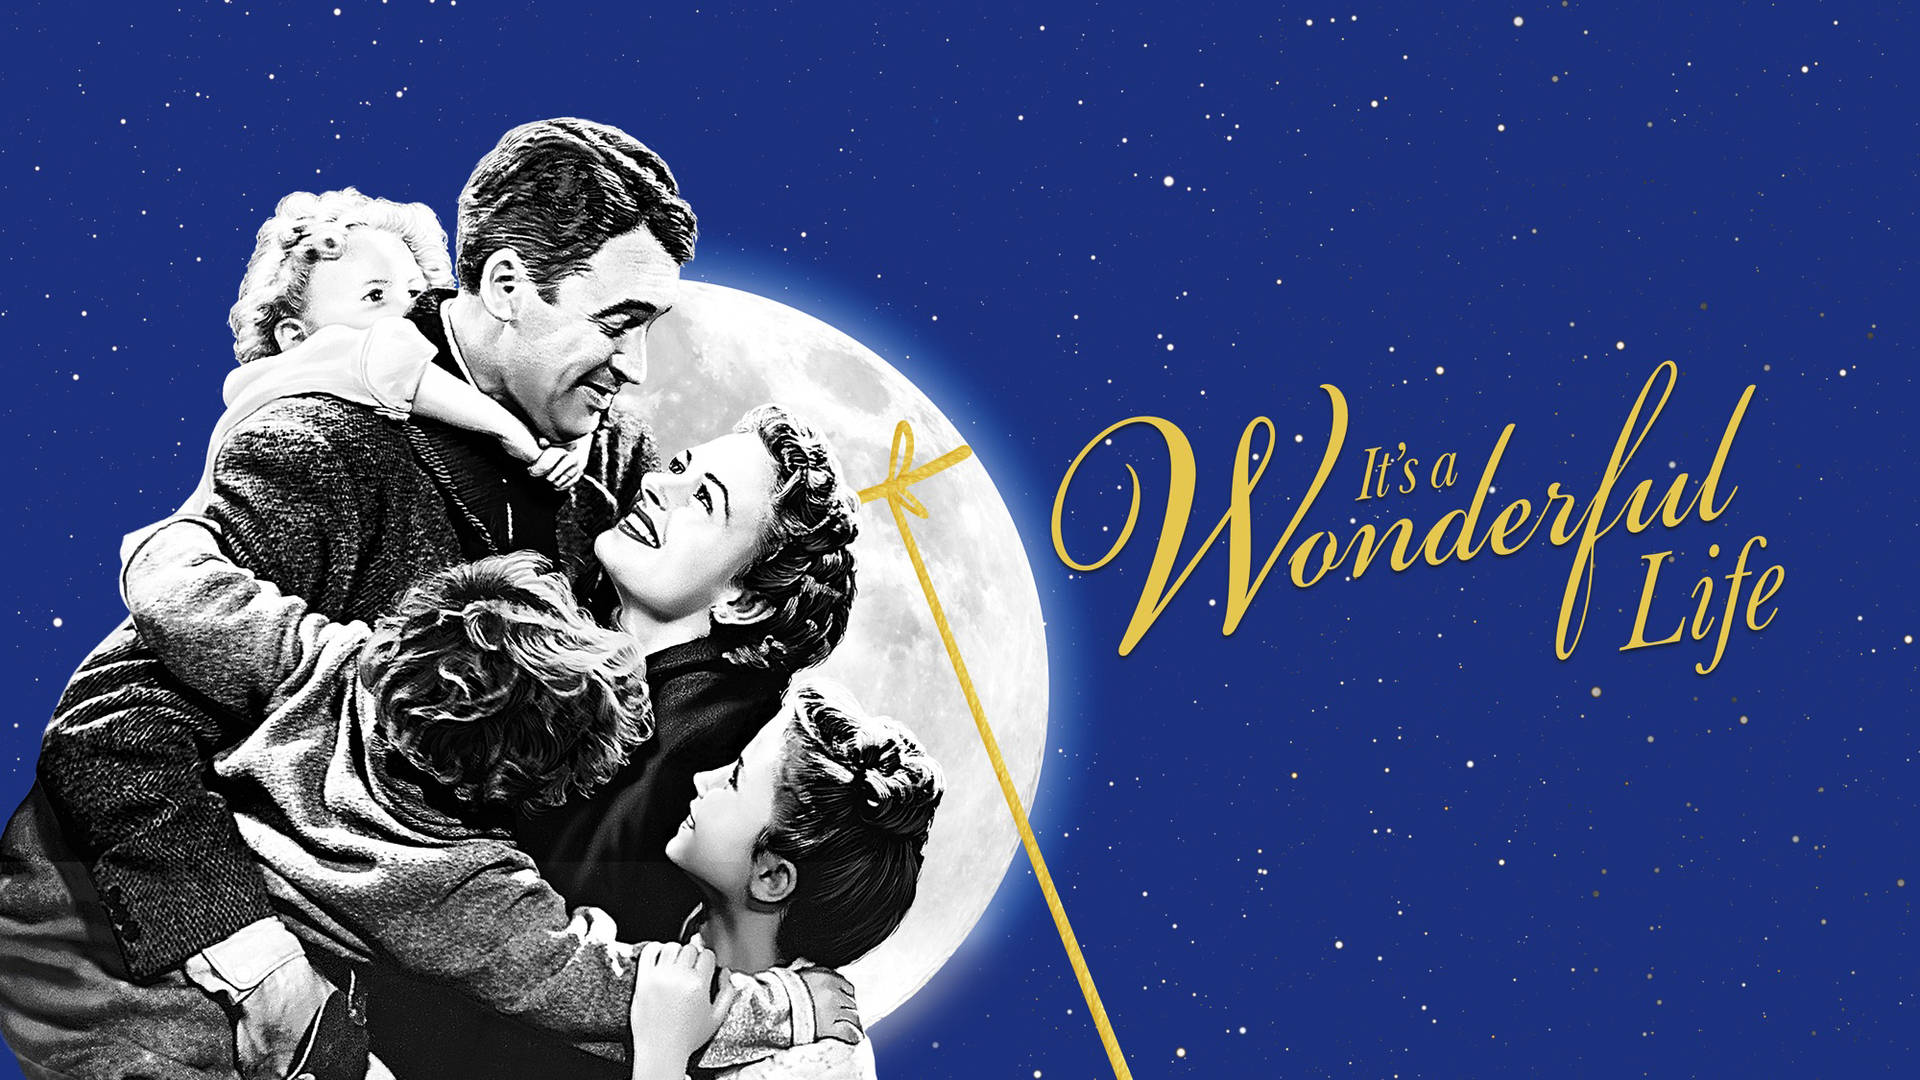 It's A Wonderful Life Family Full Moon Background